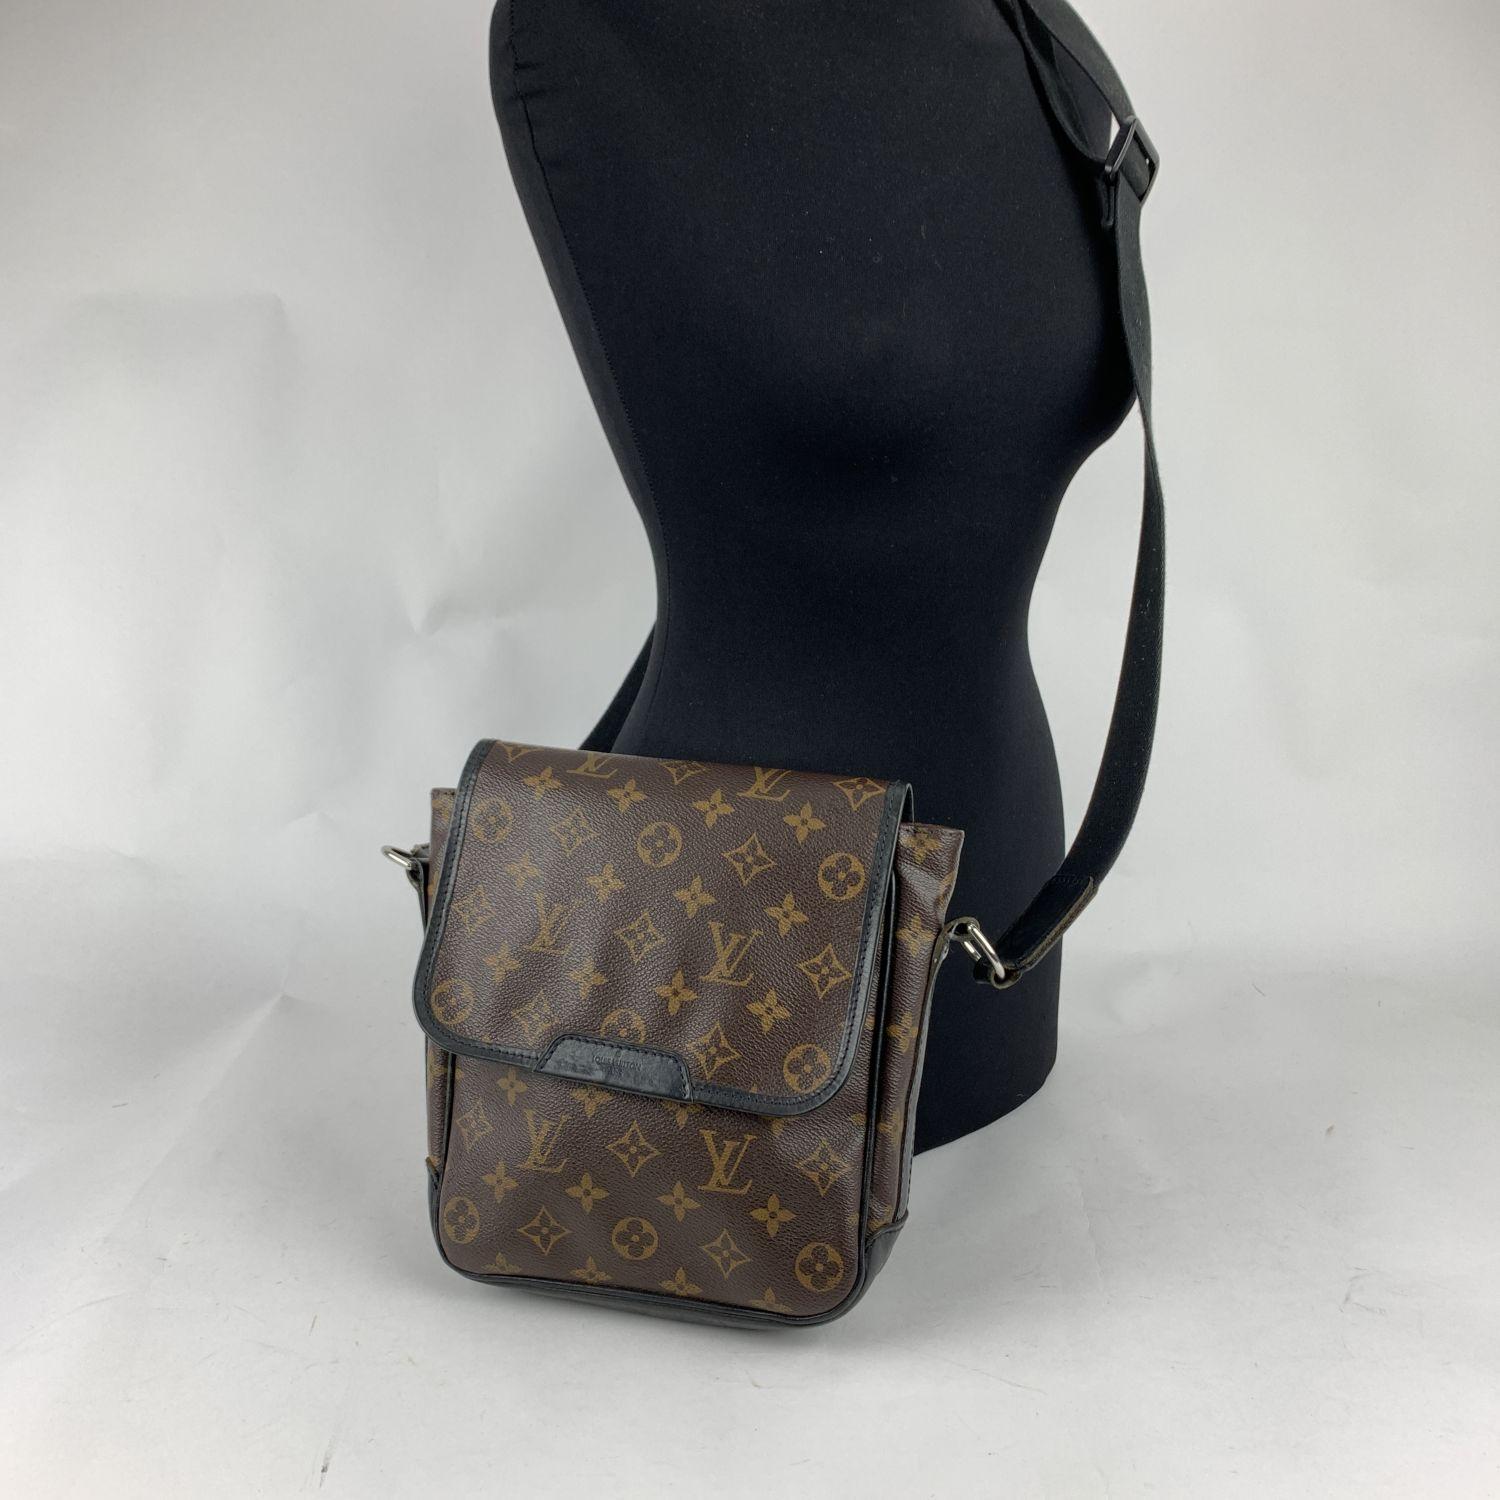 Louis Vuitton 'Macassar Bass PM' Crossbody Bag, crafted in monogram canvas with black leather trim. The exterior features a flap front closure. Burgundy canvas lining. 1 side open pocket inside. Adjustable black nylon shoulder strap. 'LOUIS VUITTON